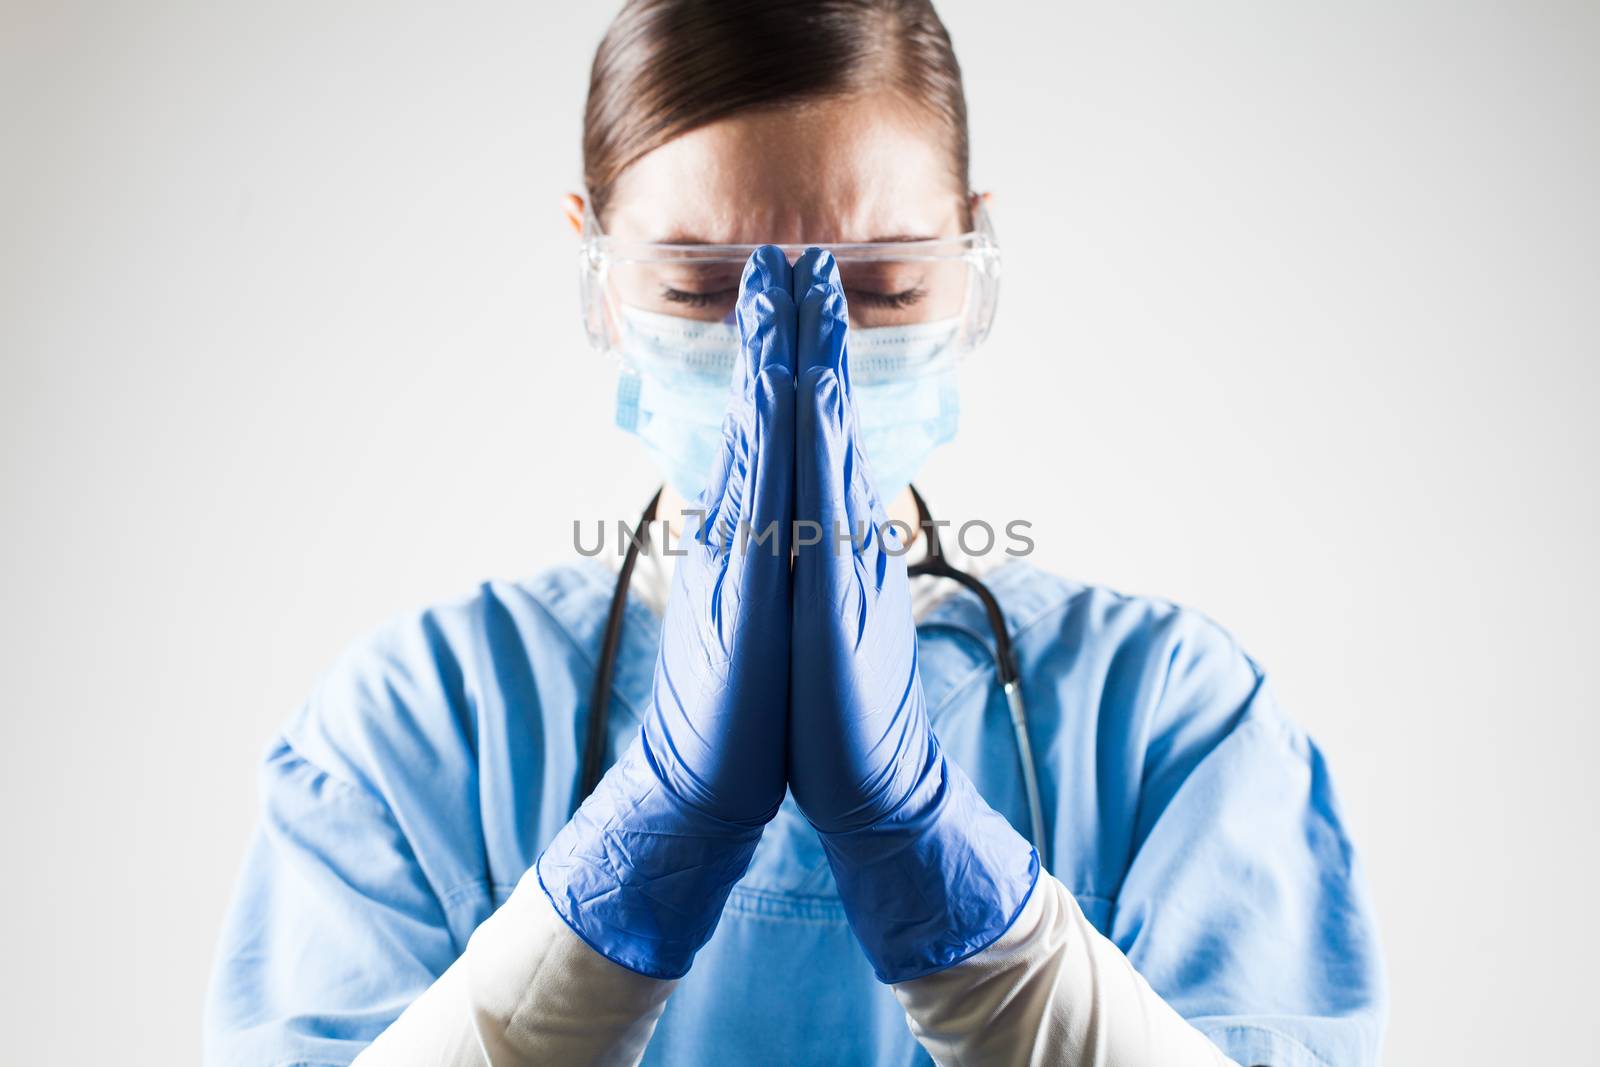 Female doctor praying hands gesture,hope and belief amid worldwide Coronavirus COVID-19 virus disease pandemic crisis outbreak,high global patient death toll and mortality rate with numerous victims